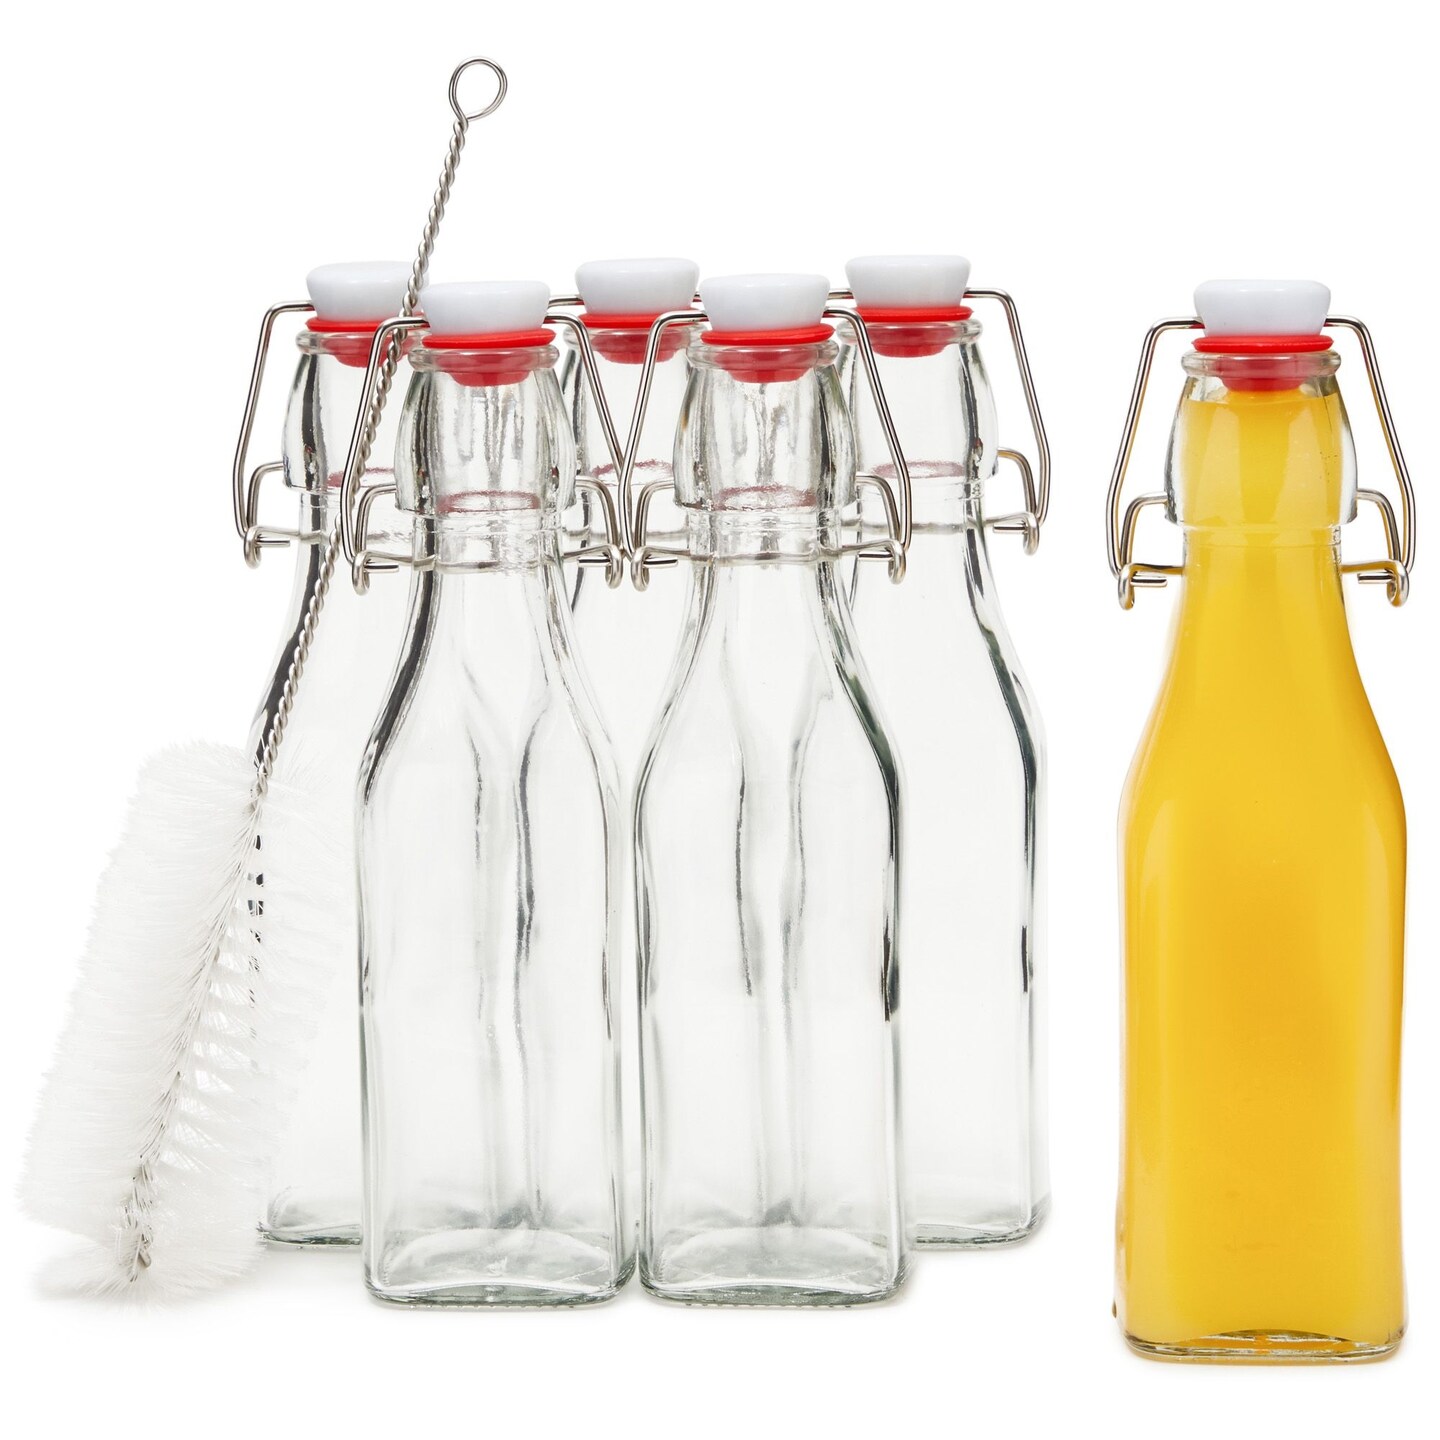 6 Pack 8 oz Swing Top Glass Bottles with Stoppers and 1 Cleaning Brush for  Homemade Kombucha, Vanilla Extract, Infused Oil, Vinegar, Tea